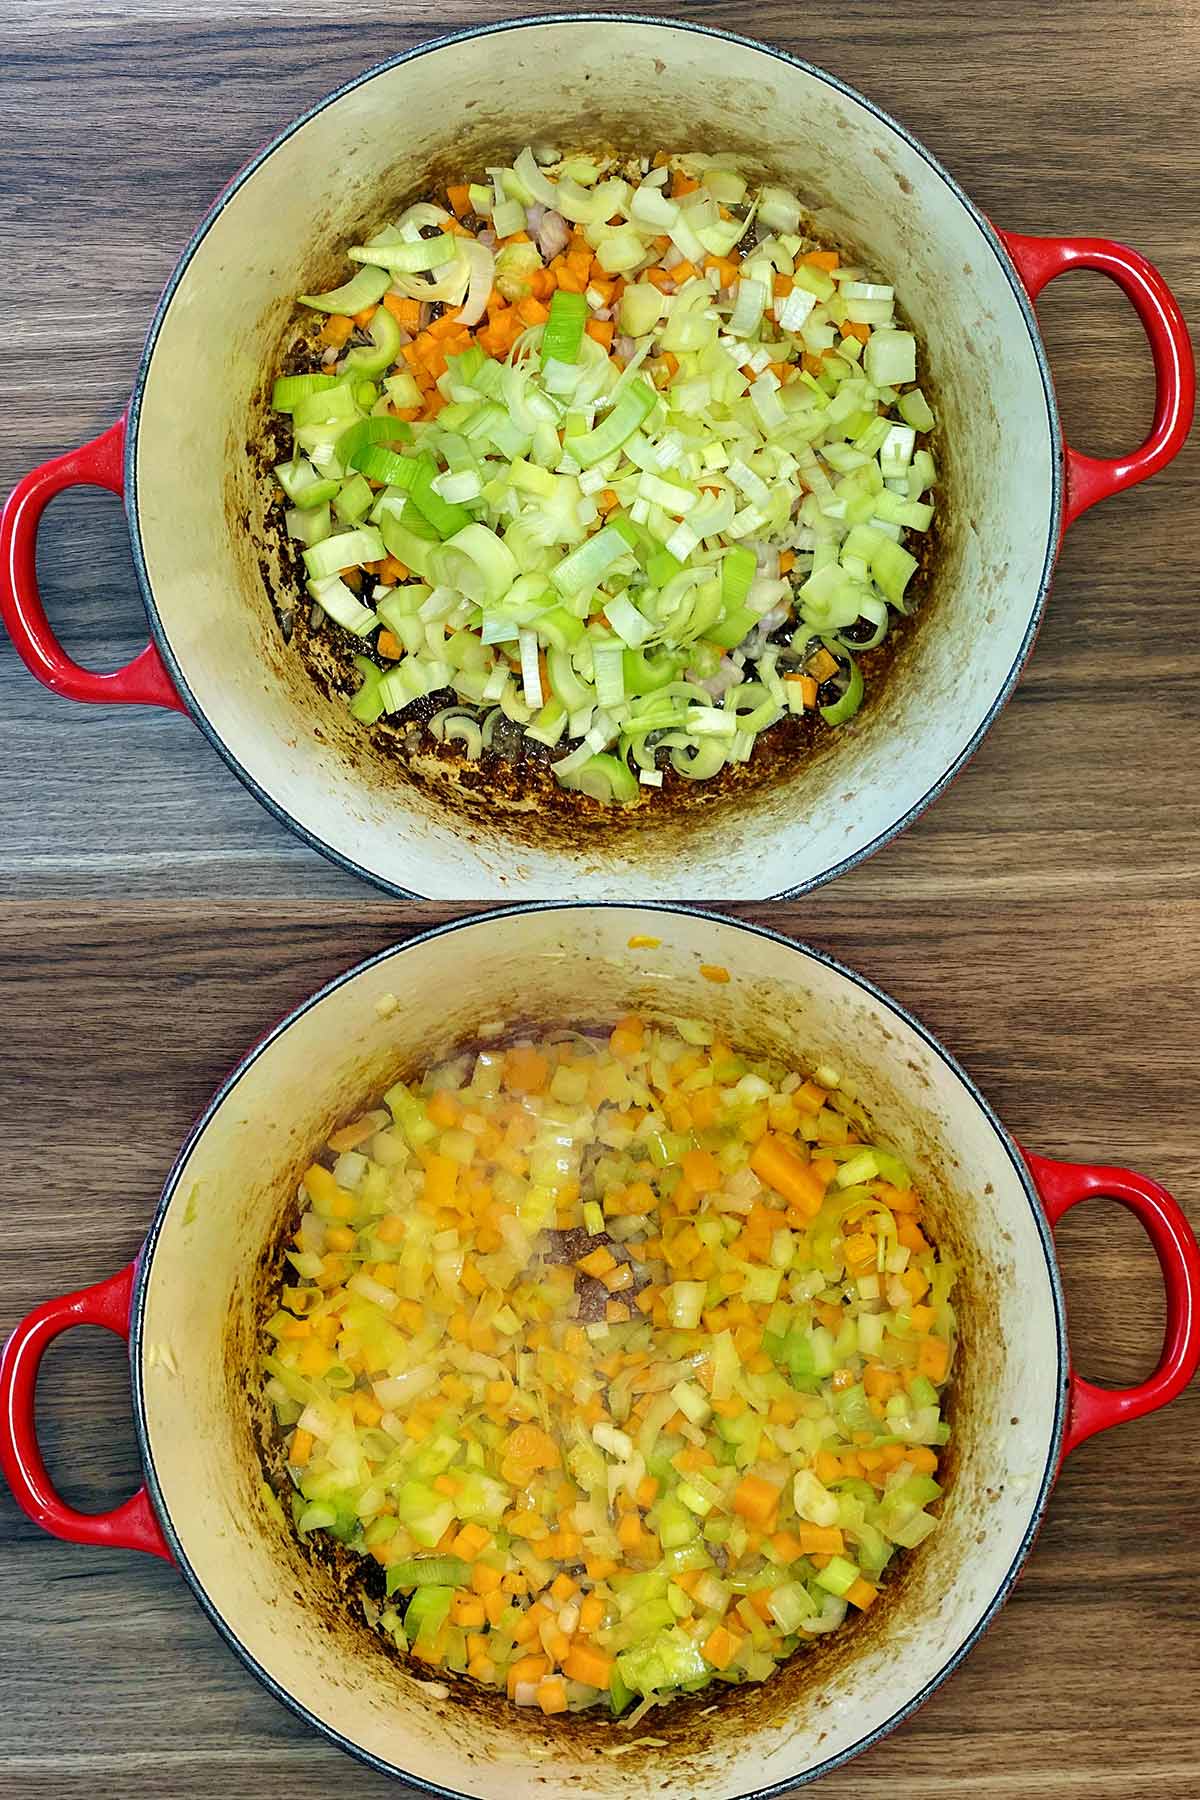 Chopped celery, leeks and carrot in a pan, before and after cooking.